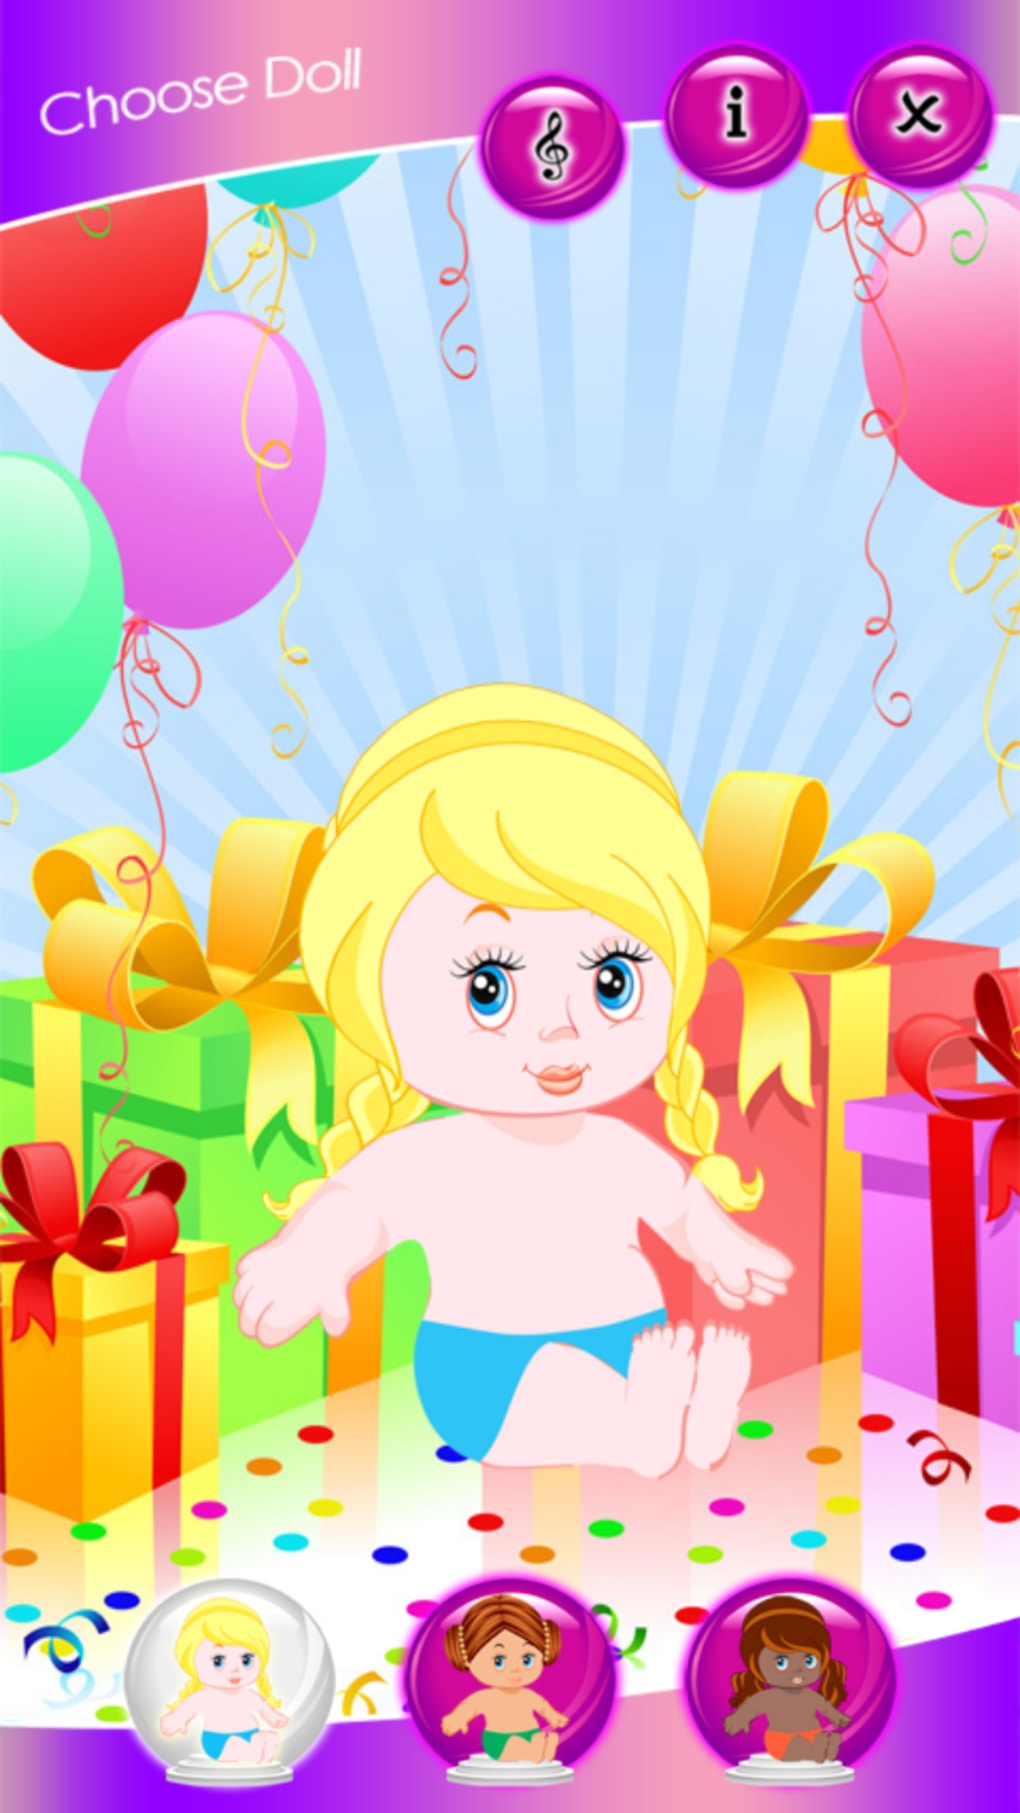 doll wale games